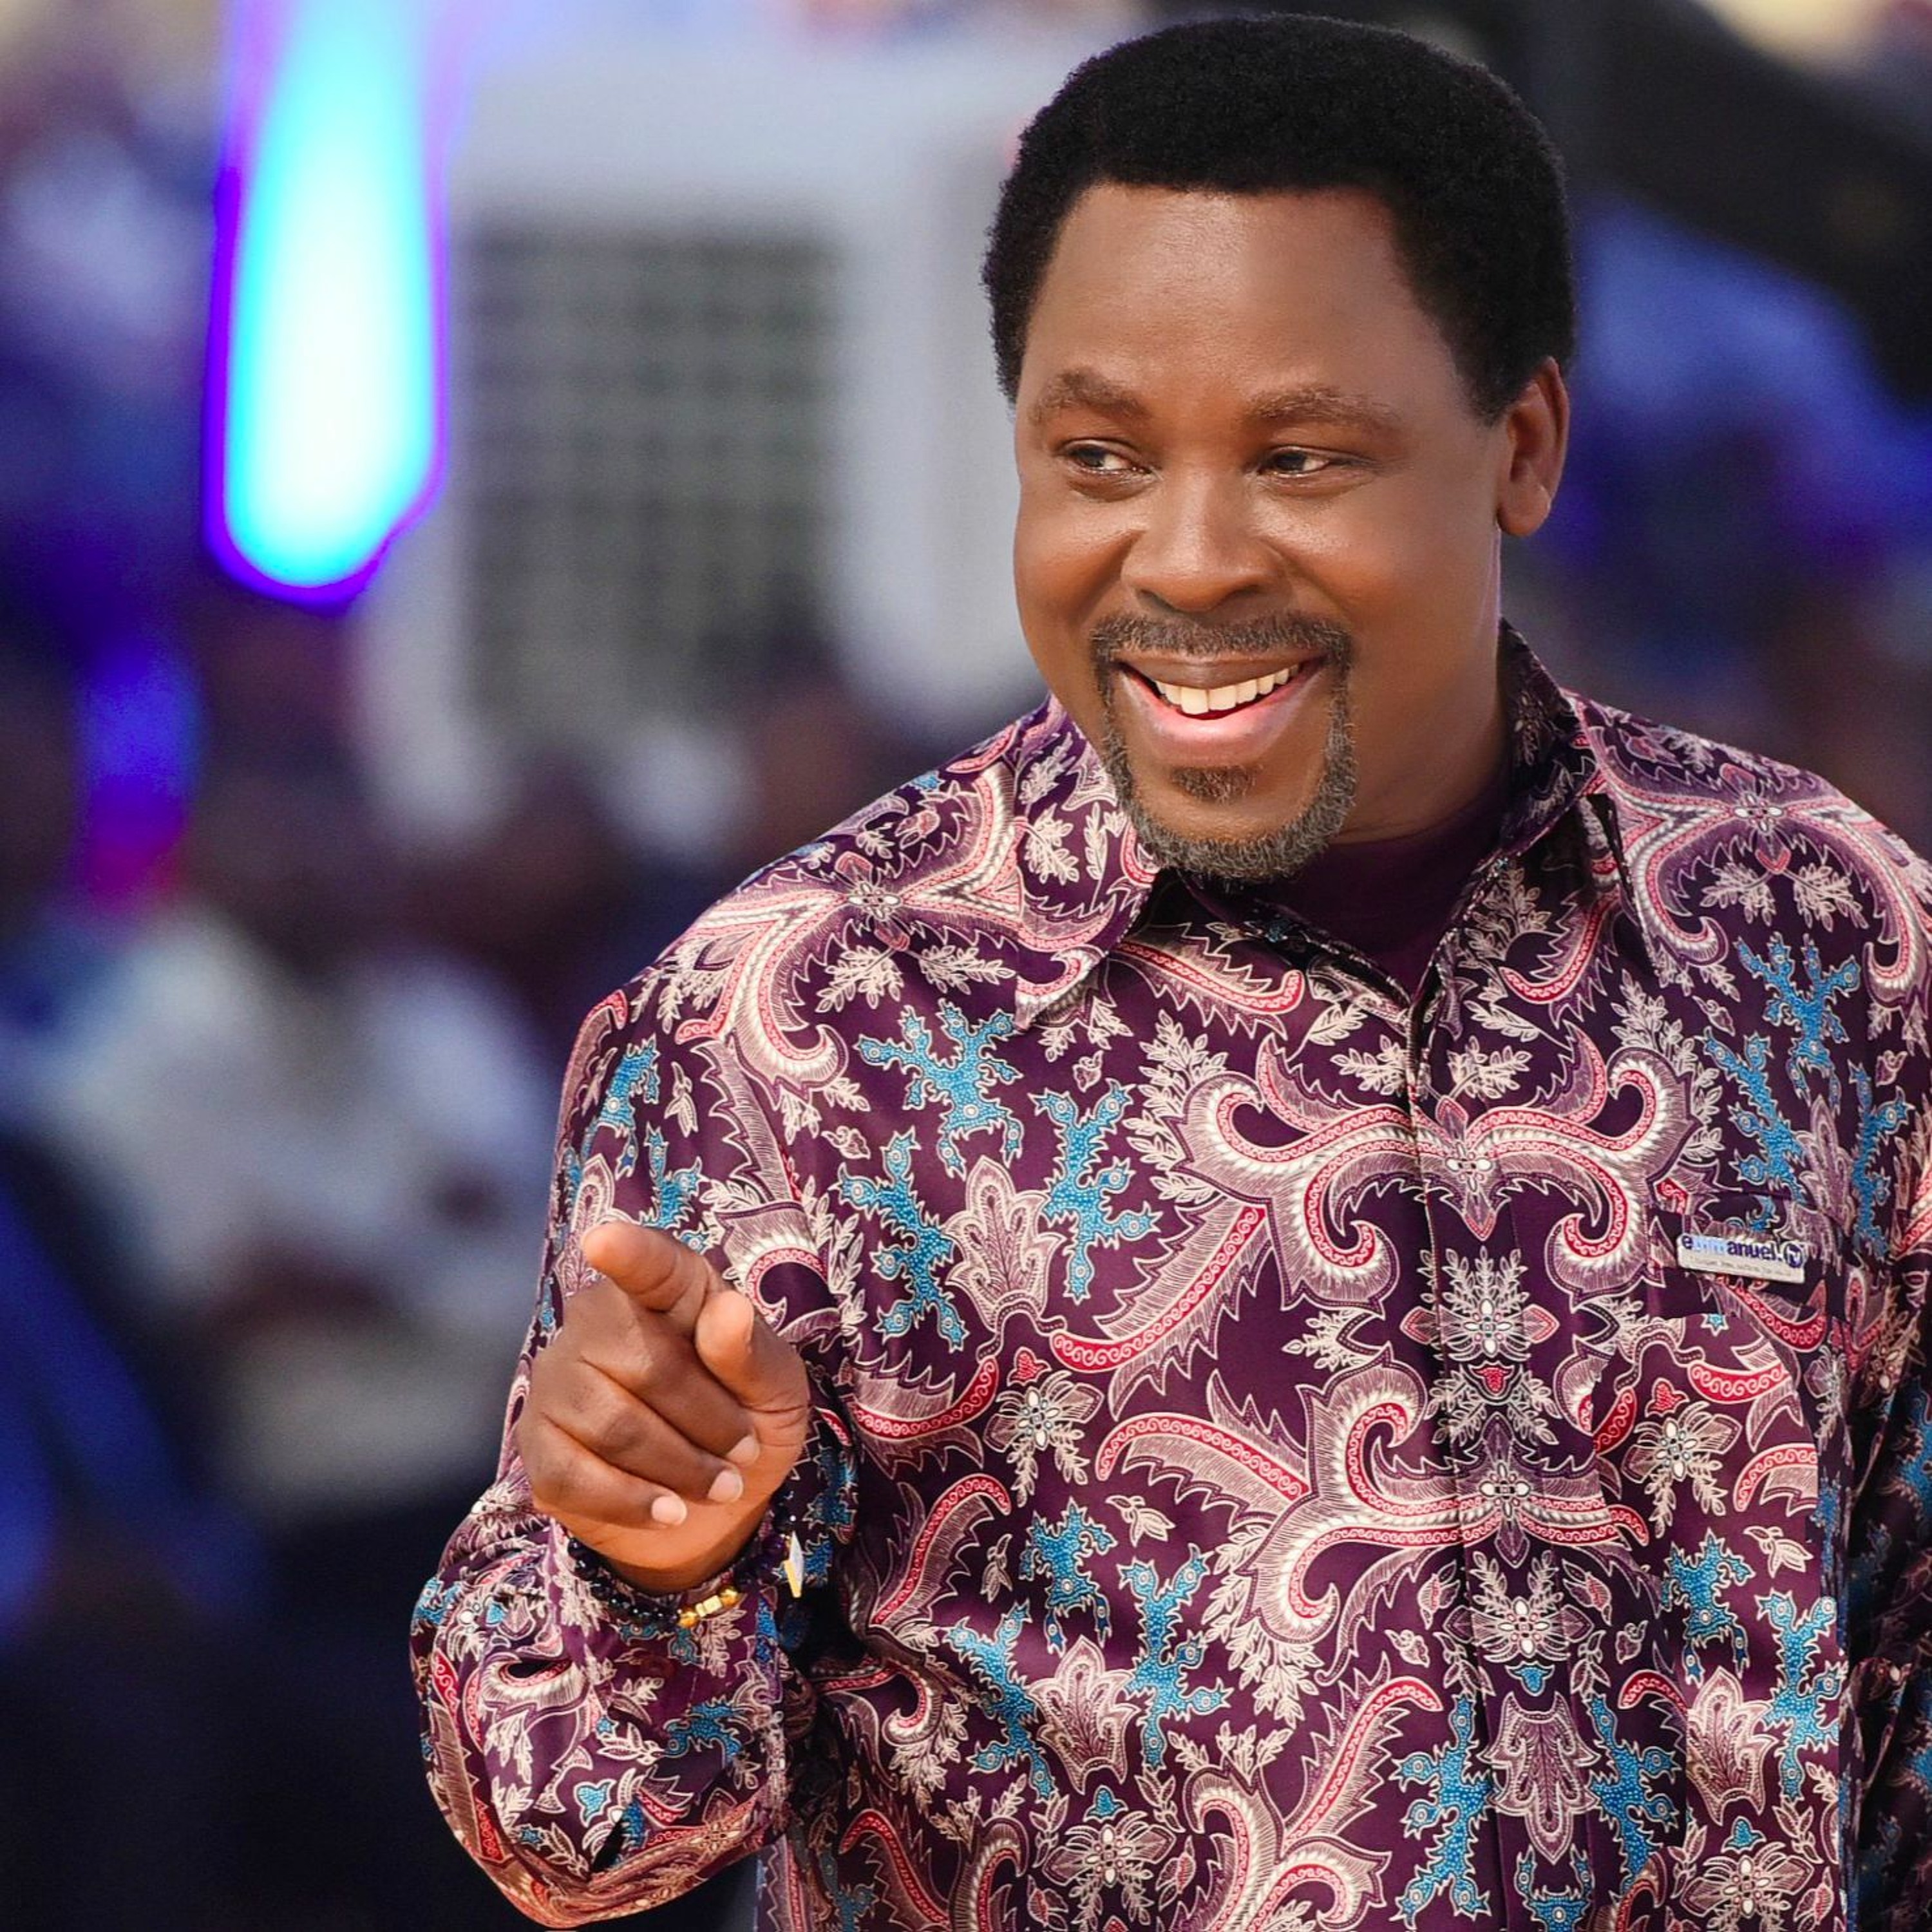 TB Joshua At The Altar 17 March 2019